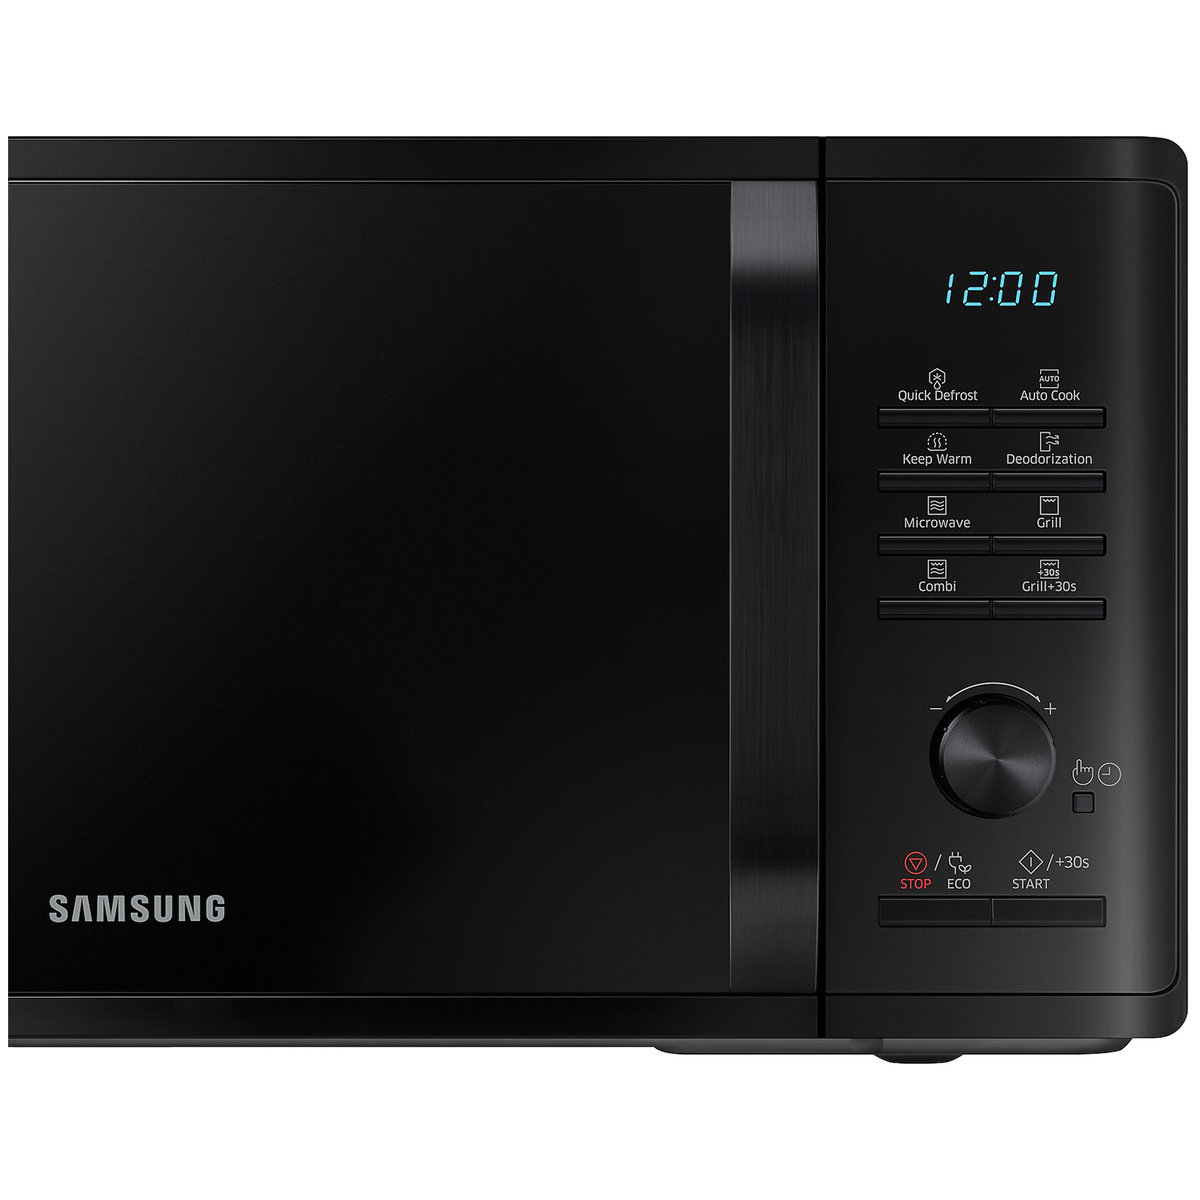 Samsung MG23A3515AK Grill Microwave Oven 23 Litre